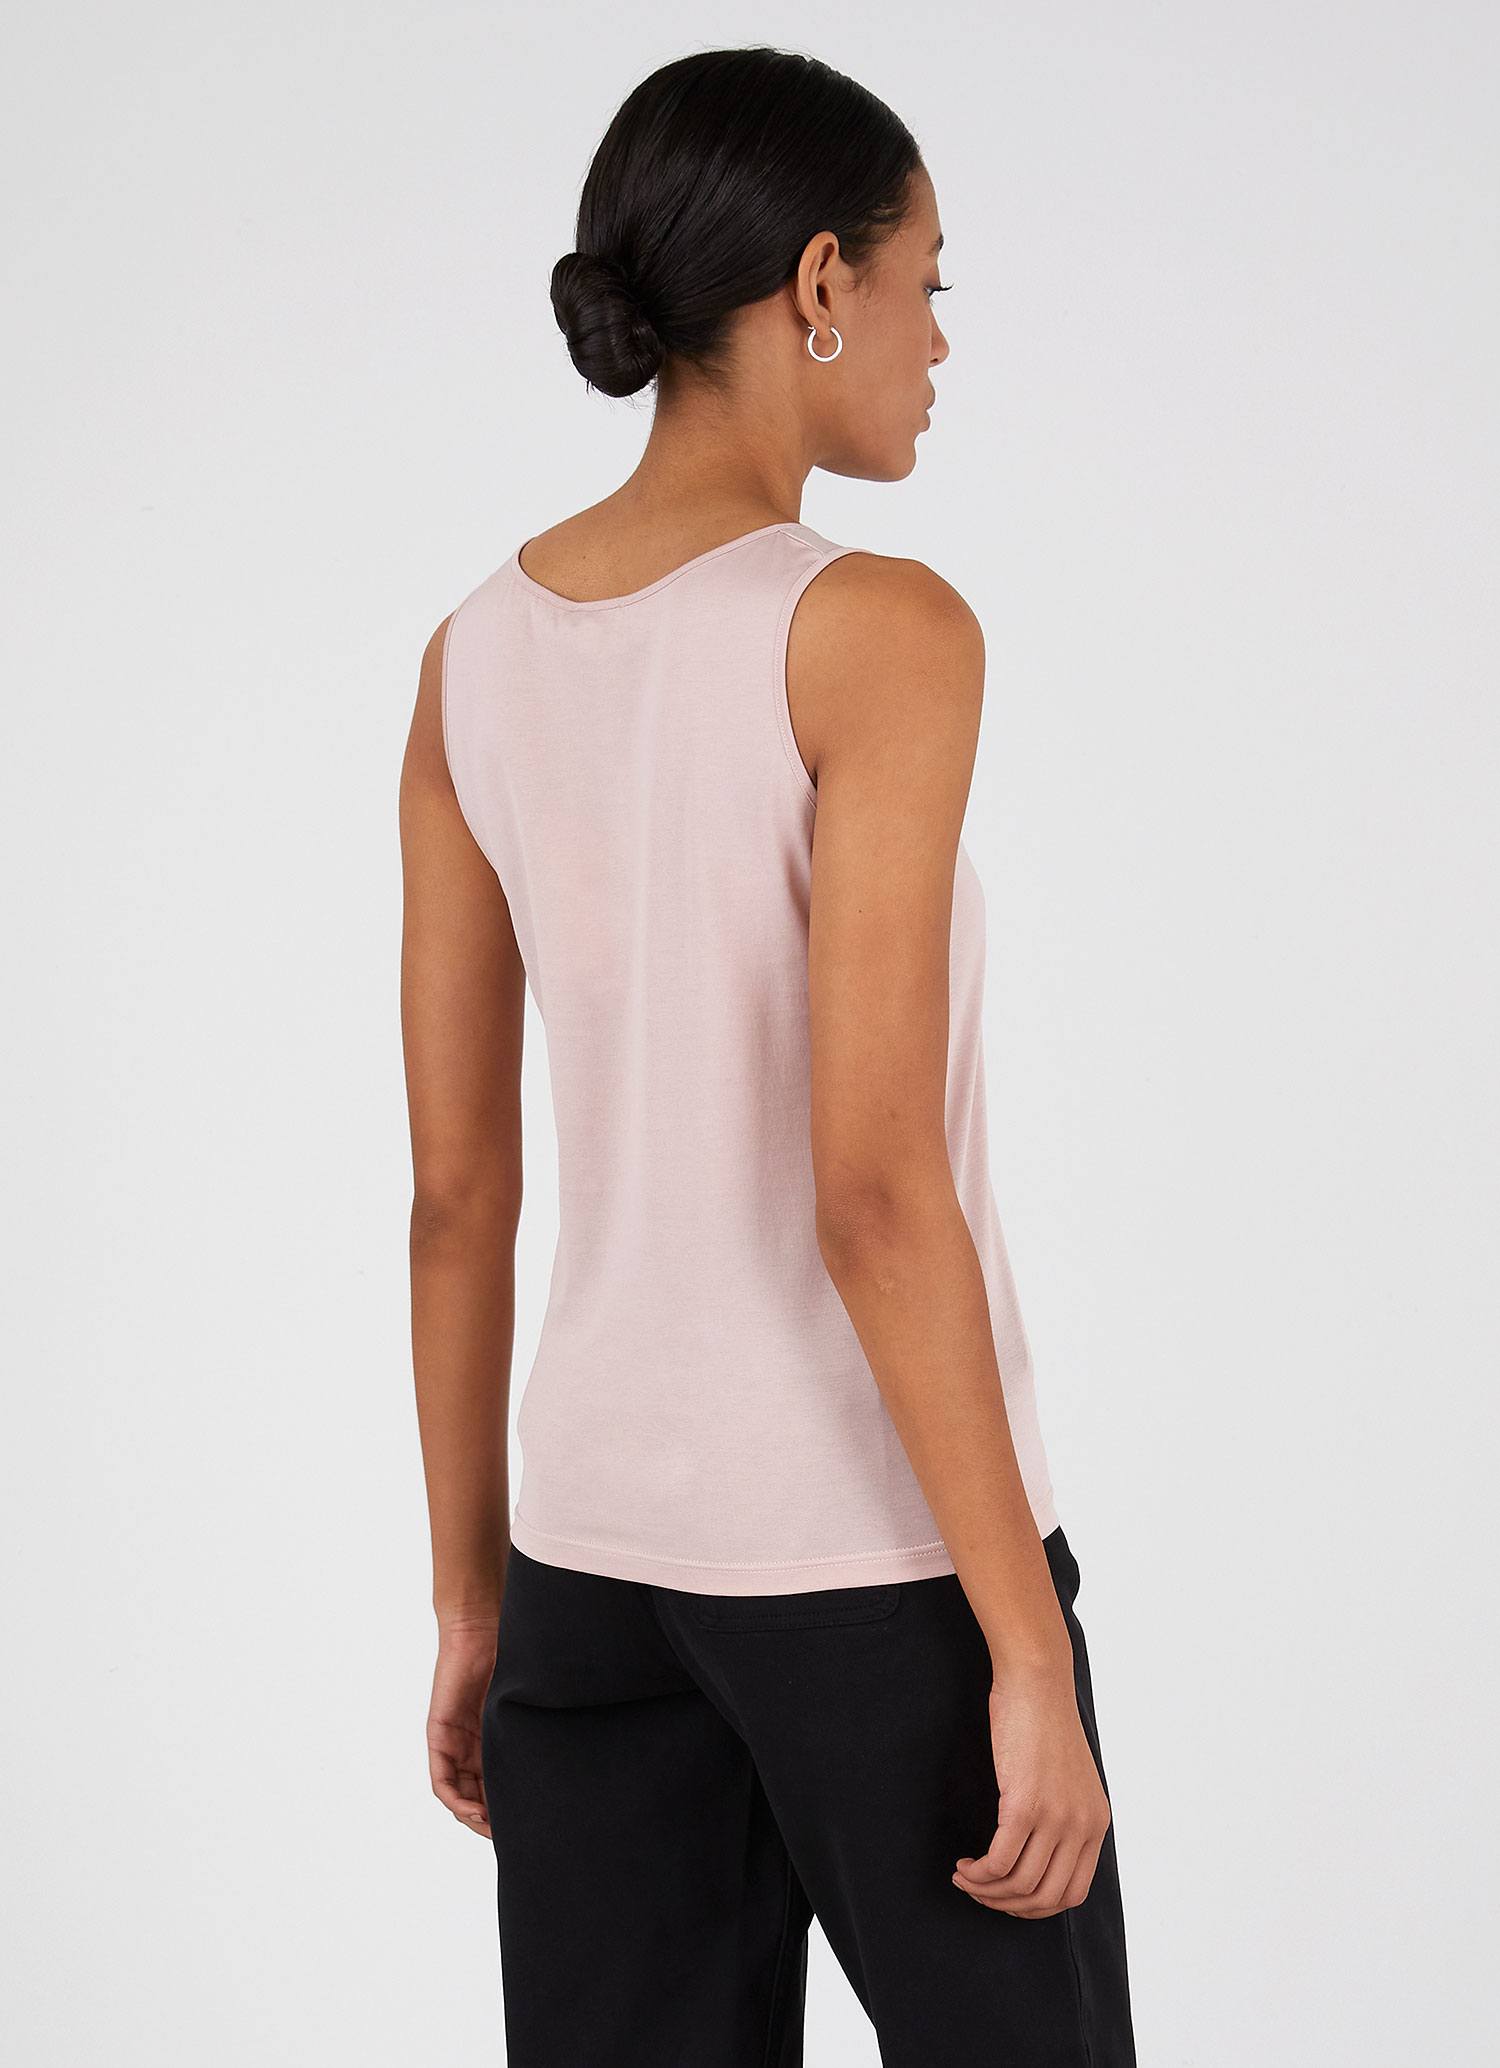 Women's Classic Vest in Shell Pink